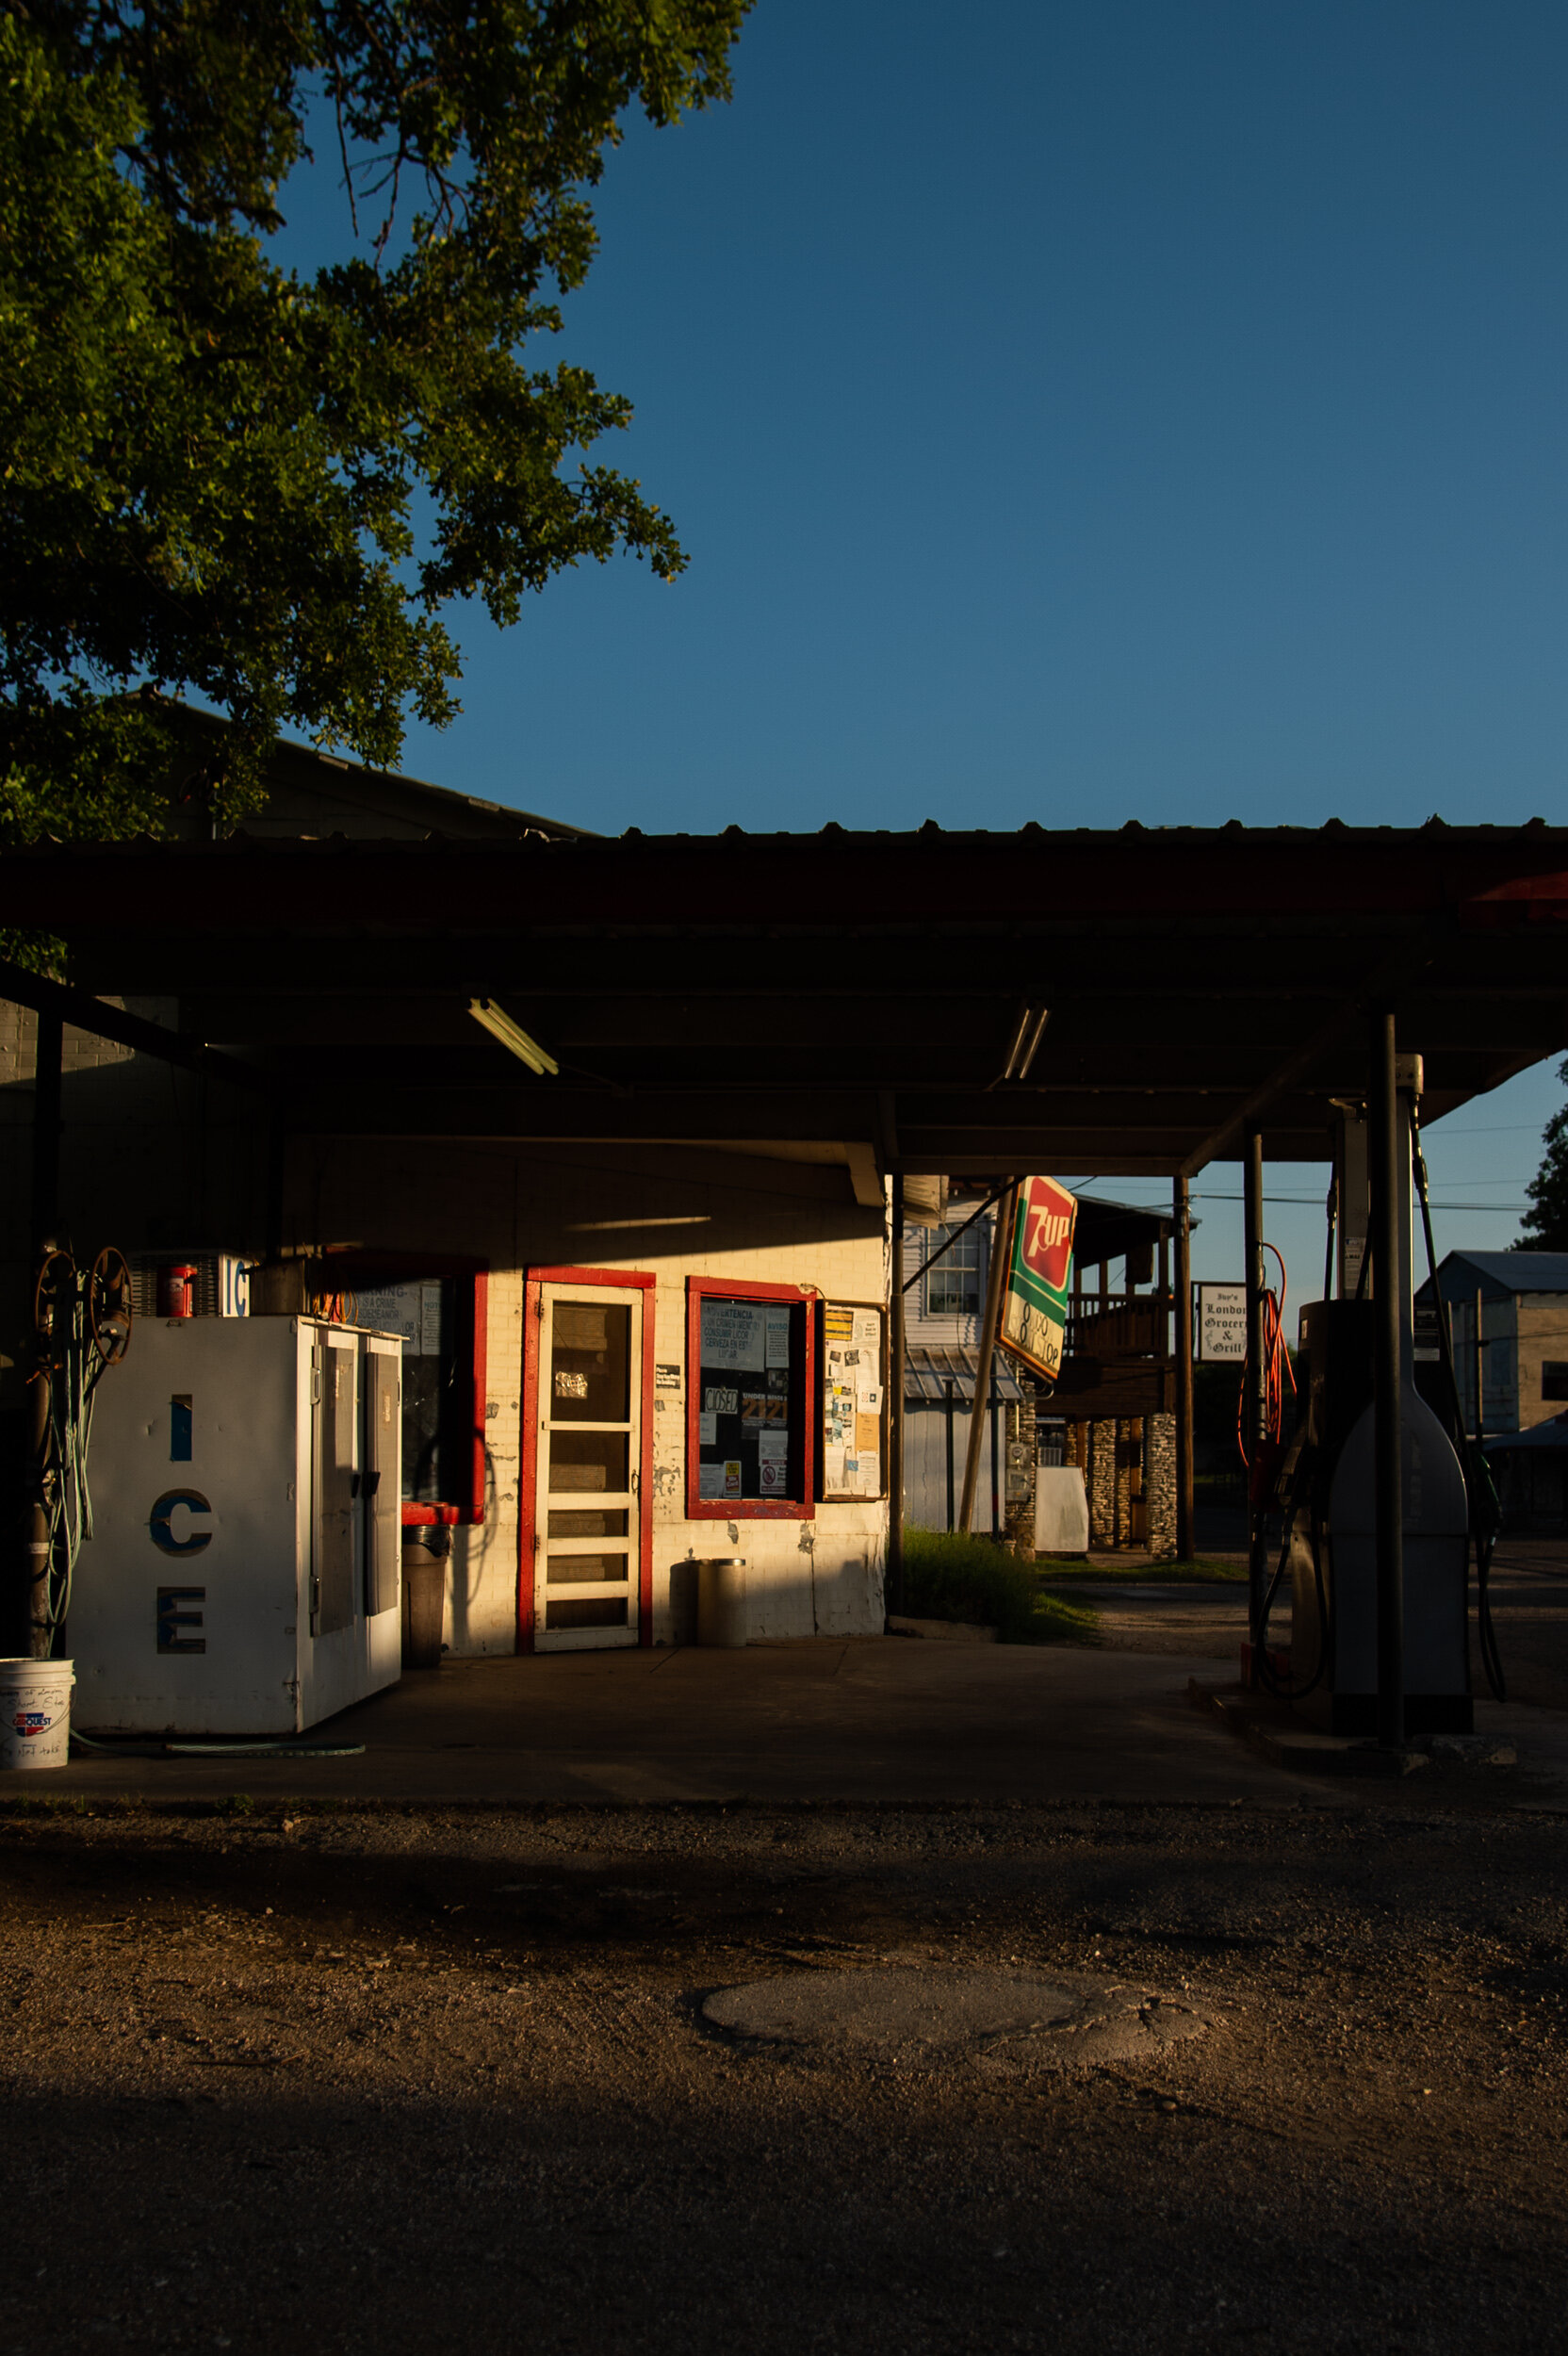  The Short Stop sits on the main street in London, Texas on May 18, 2021. The Short Stop is the only gas station for miles in any direction.  